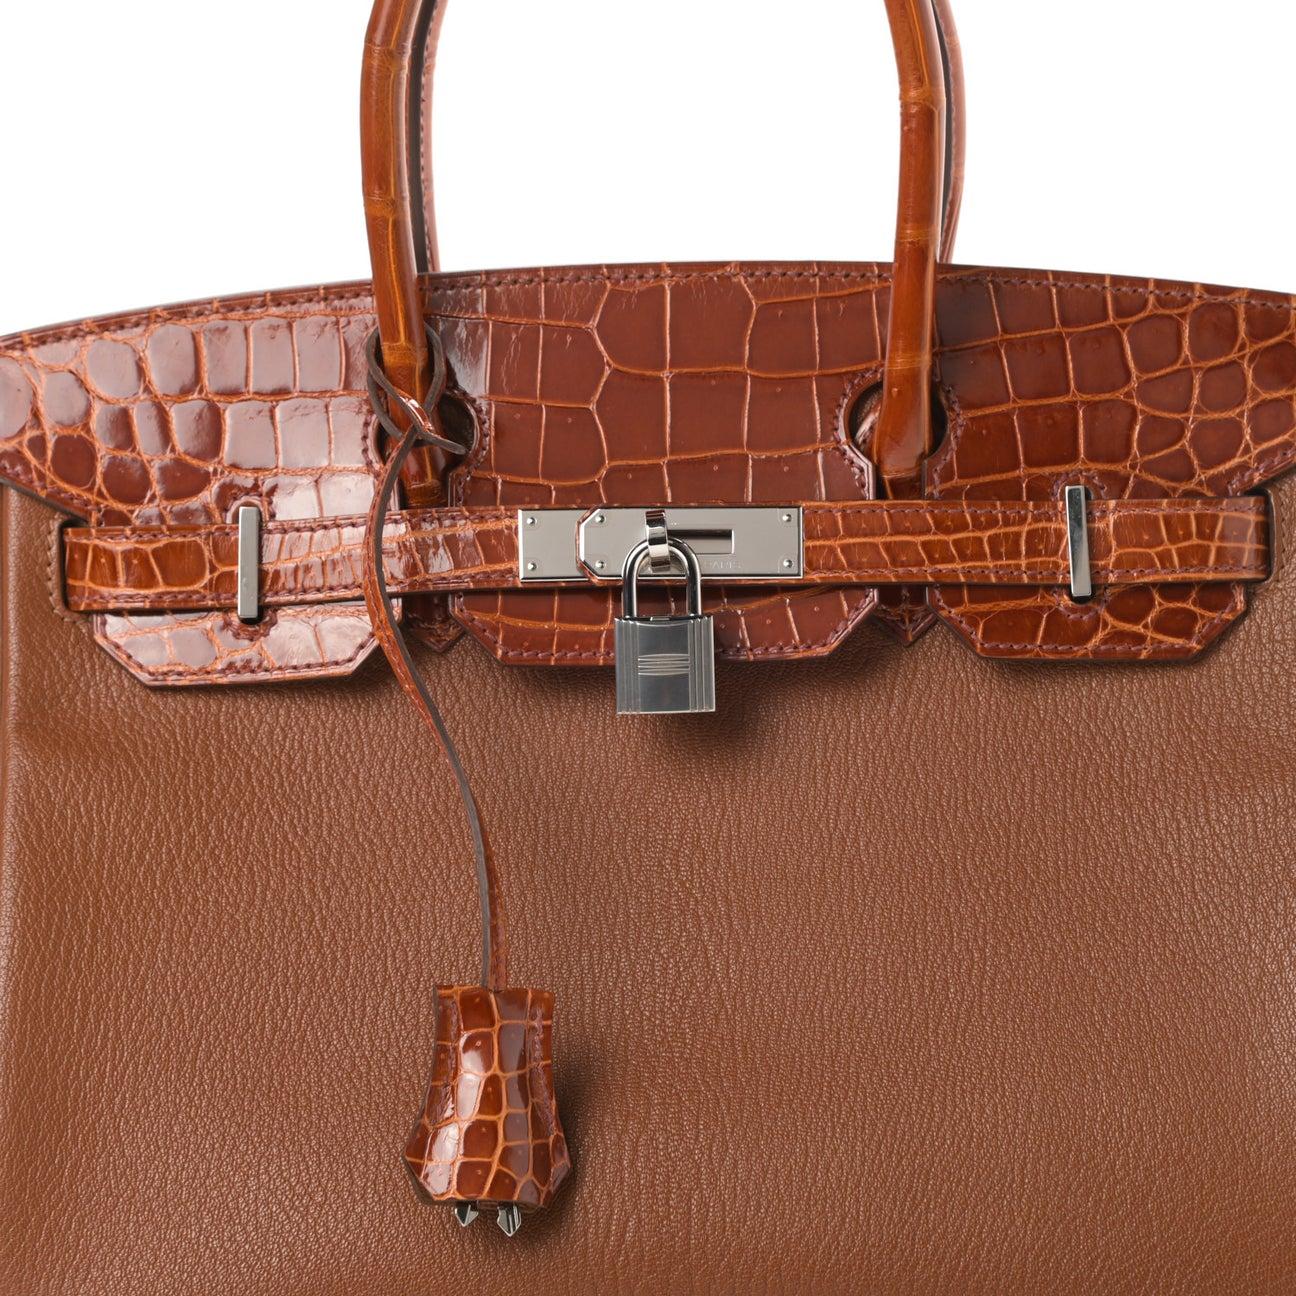 New Condition
From 2019 Collection
Miel Sienne
Chèvre Mangalore Leather
Crocodile
Palladium Hardware
Measures 11.5